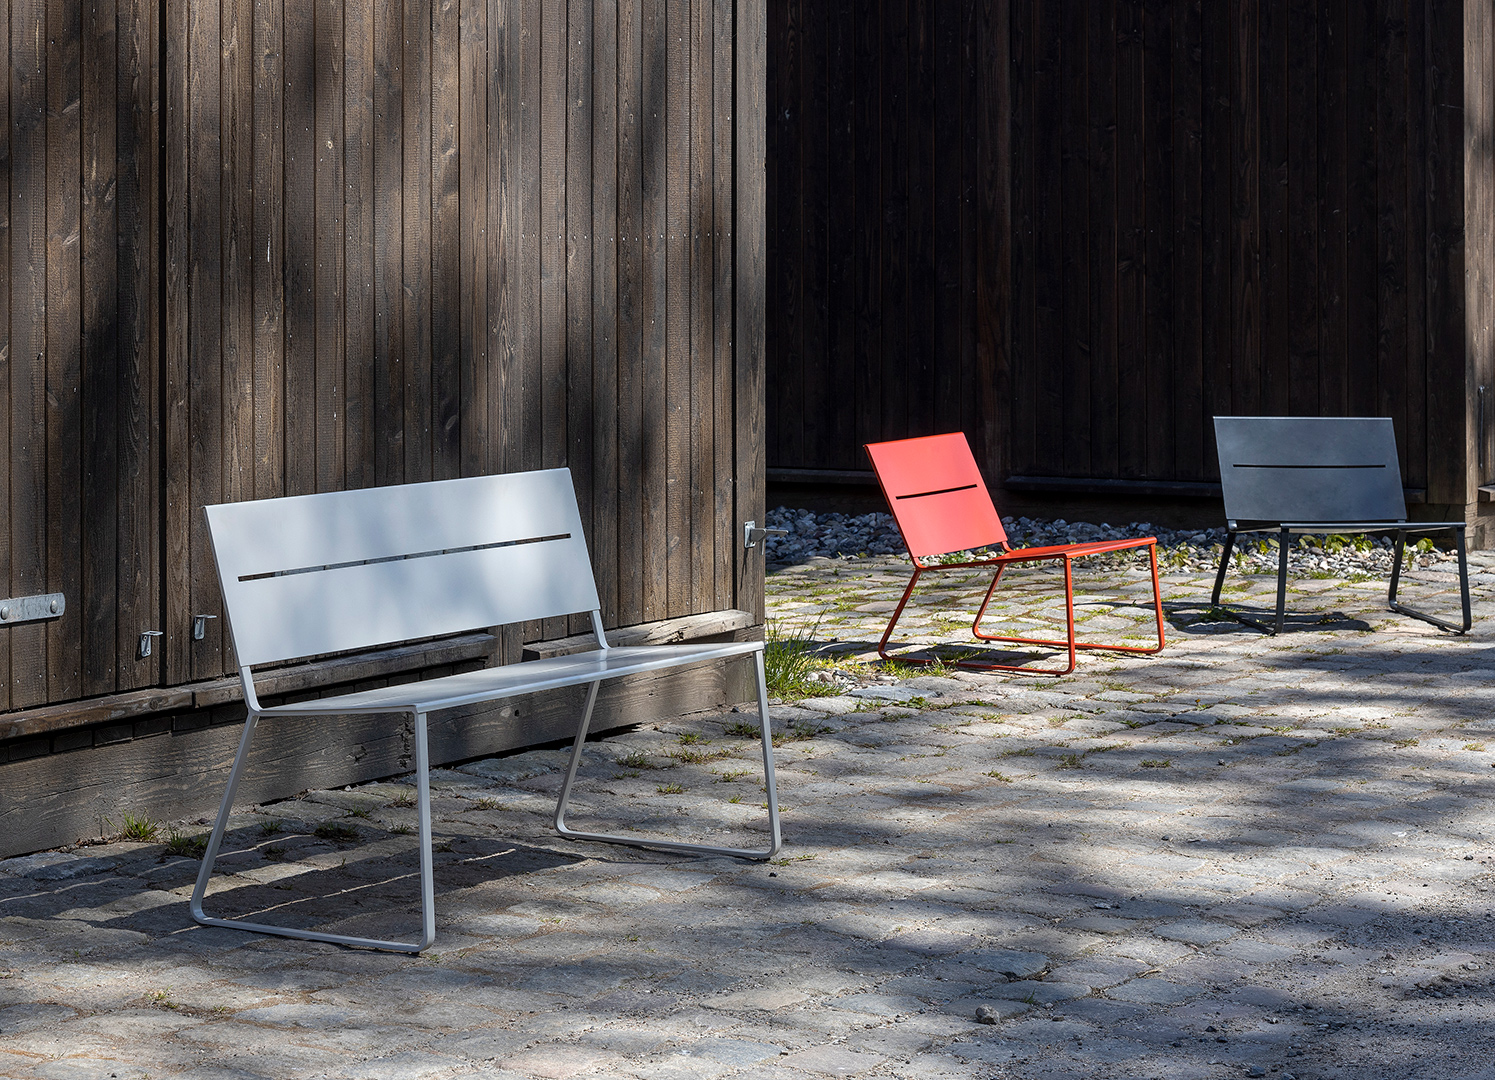 White TERÄS park bench in front of two lounge chairs